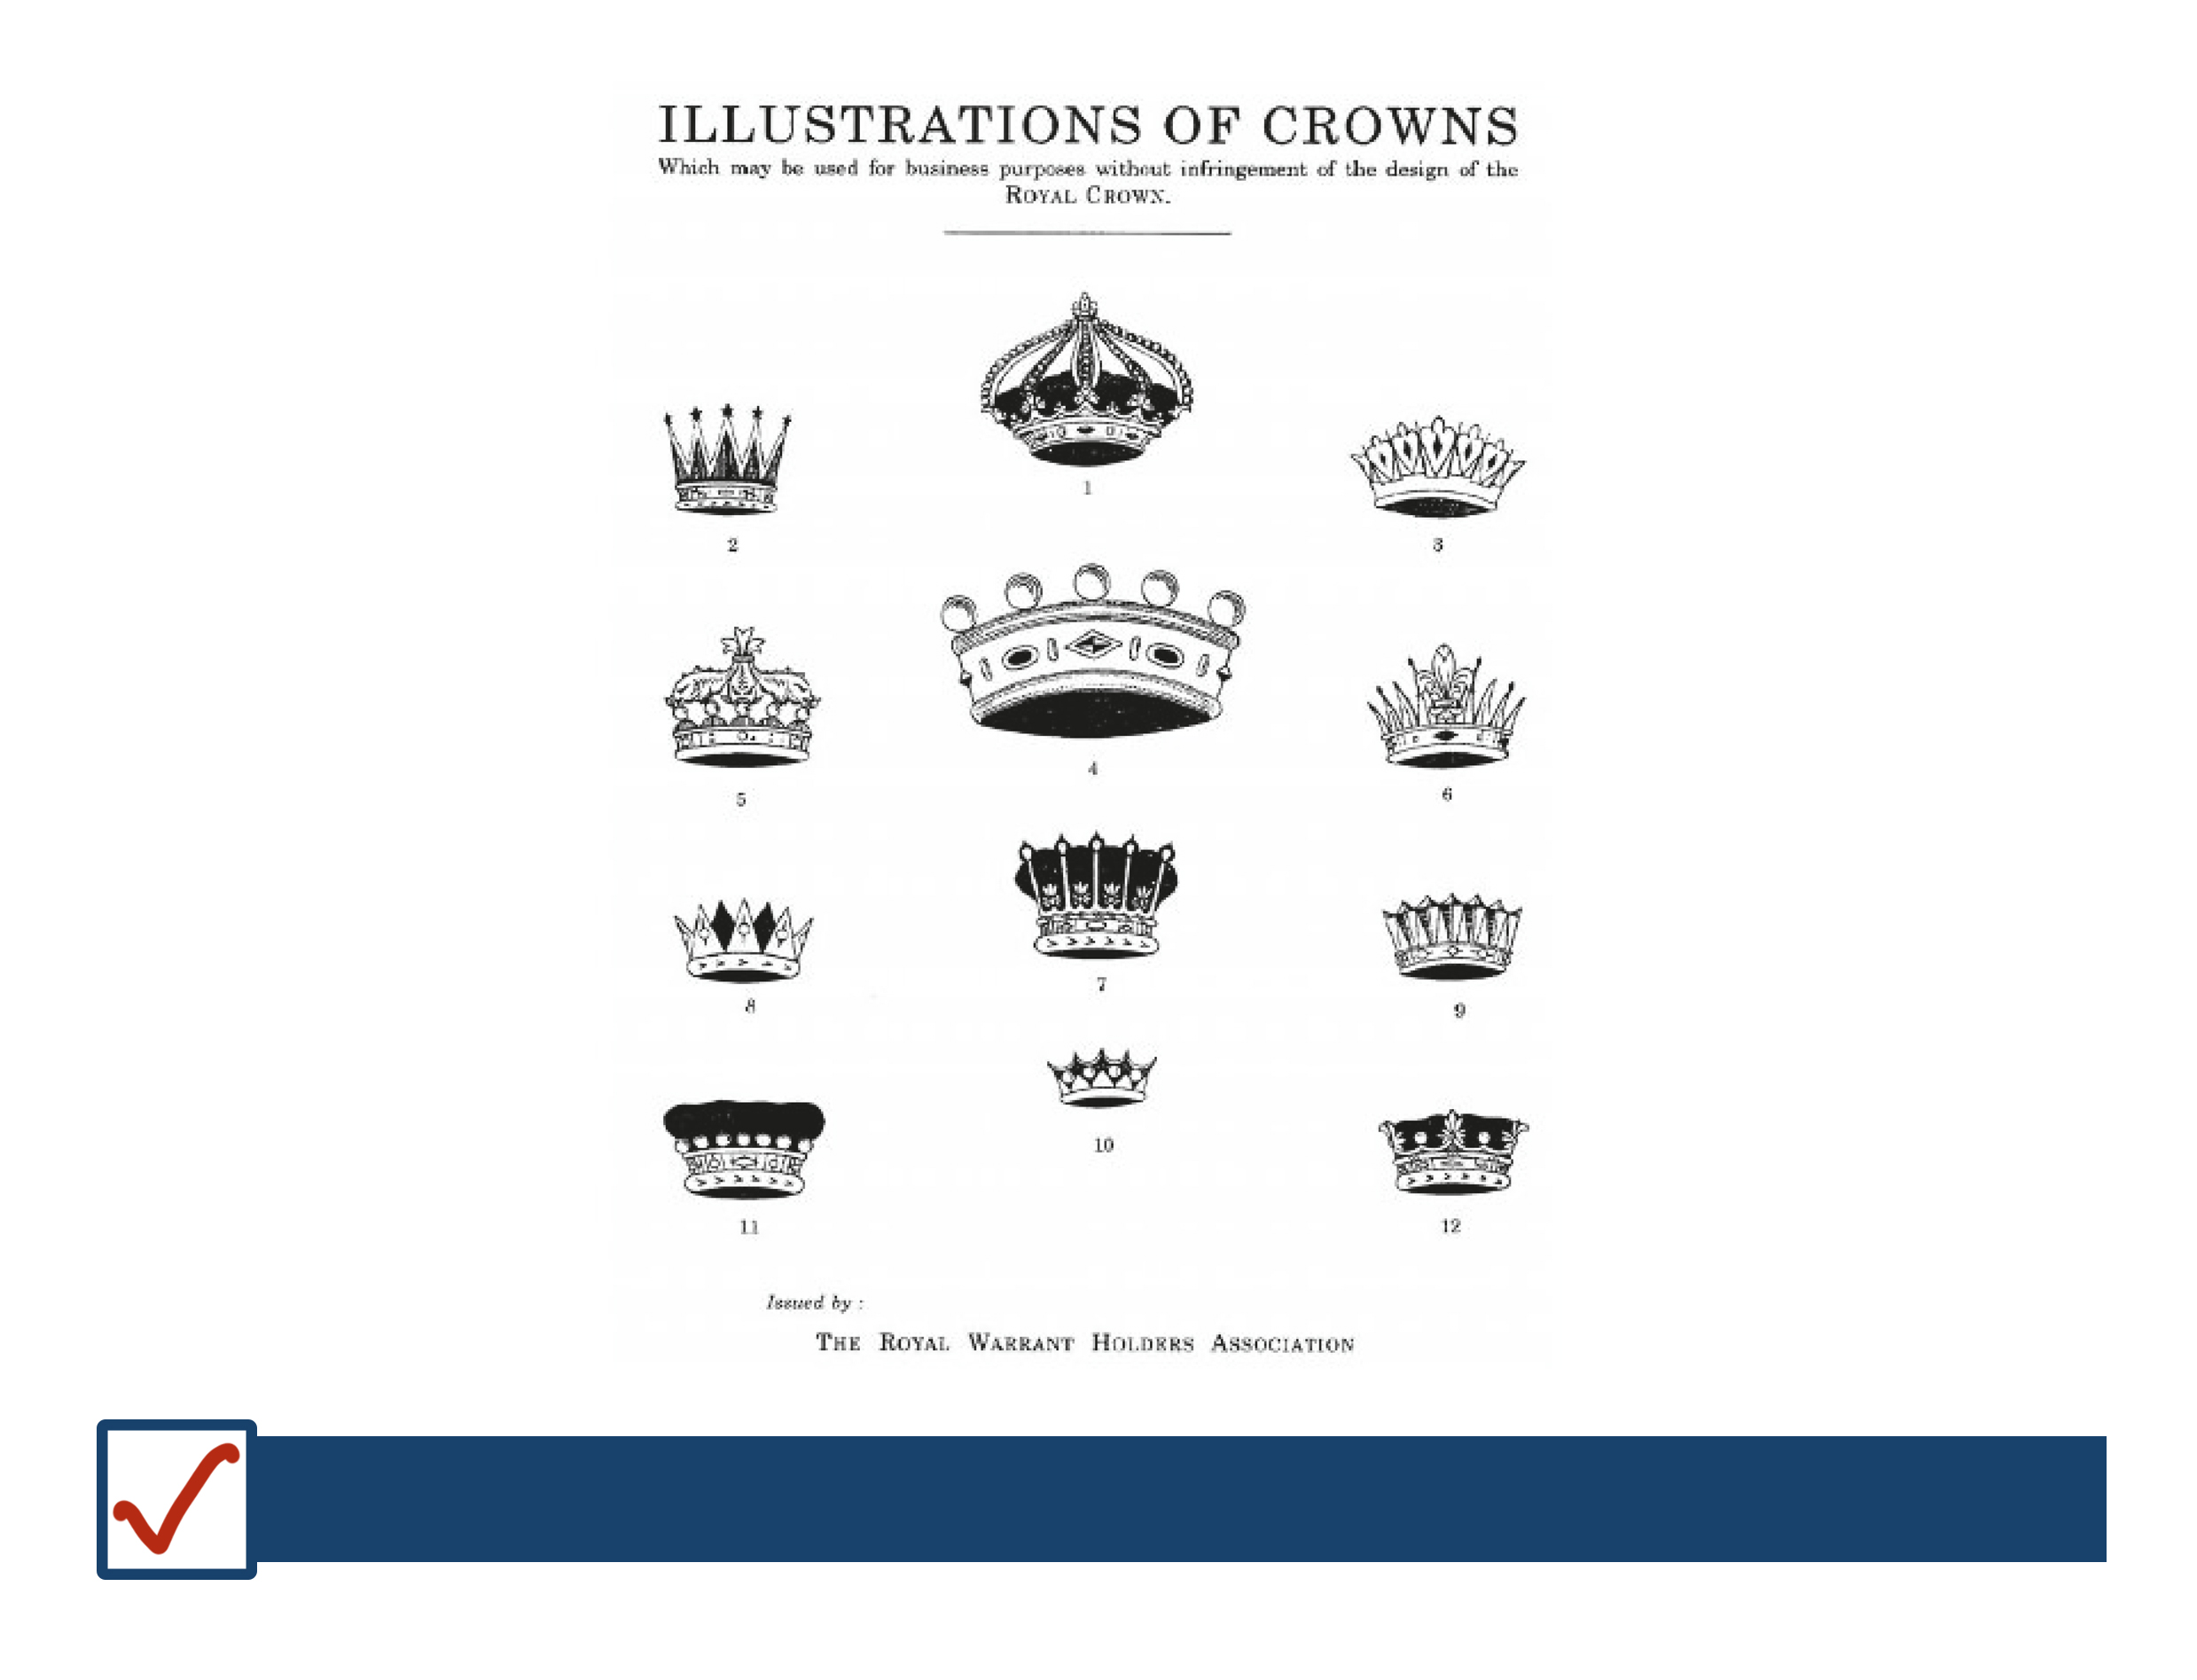 Illustrations of crowns